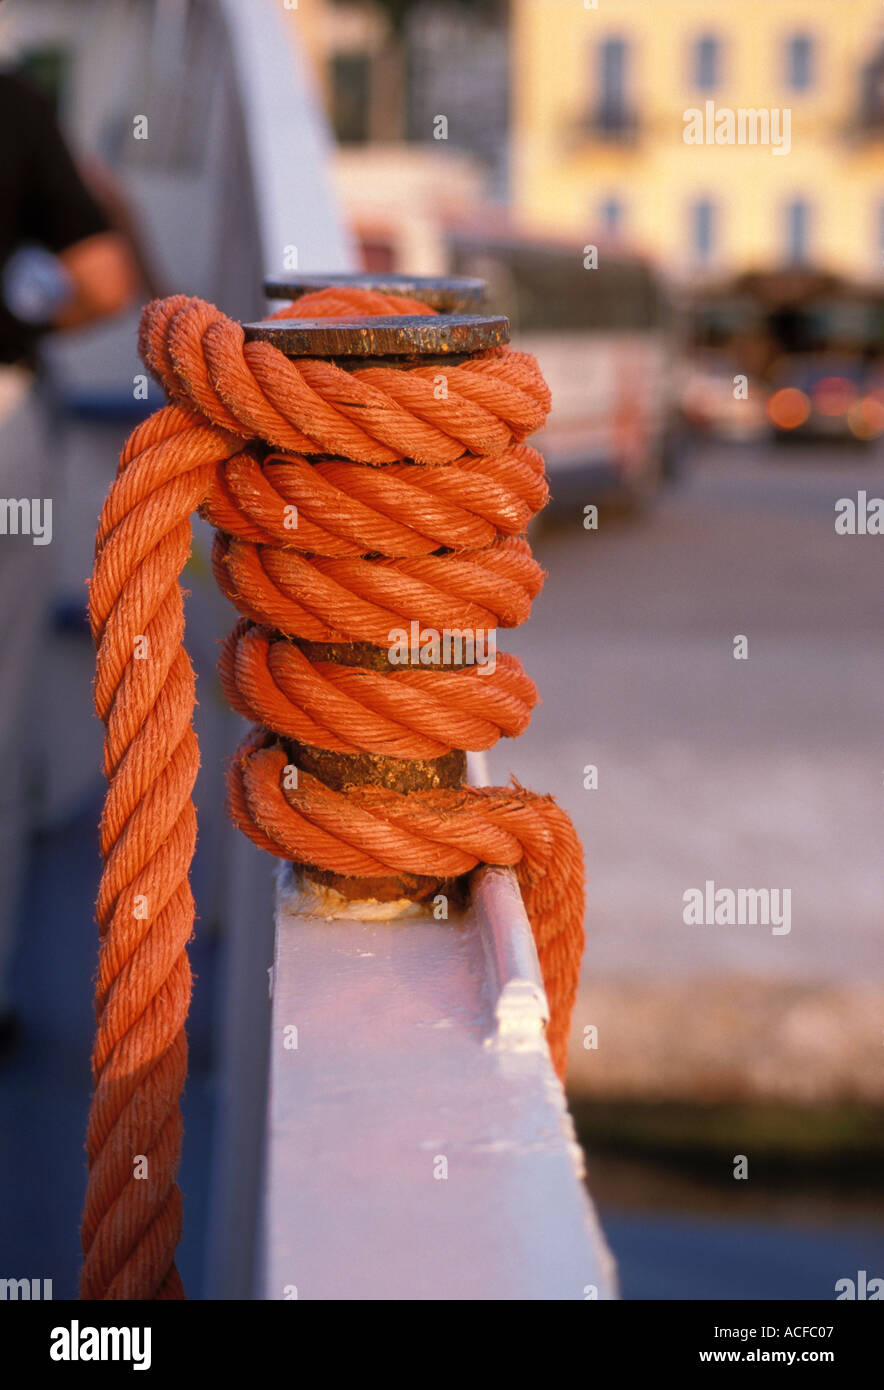 https://c8.alamy.com/comp/ACFC07/thick-weathered-orange-rope-coiled-and-tied-to-mooring-post-on-boat-ACFC07.jpg